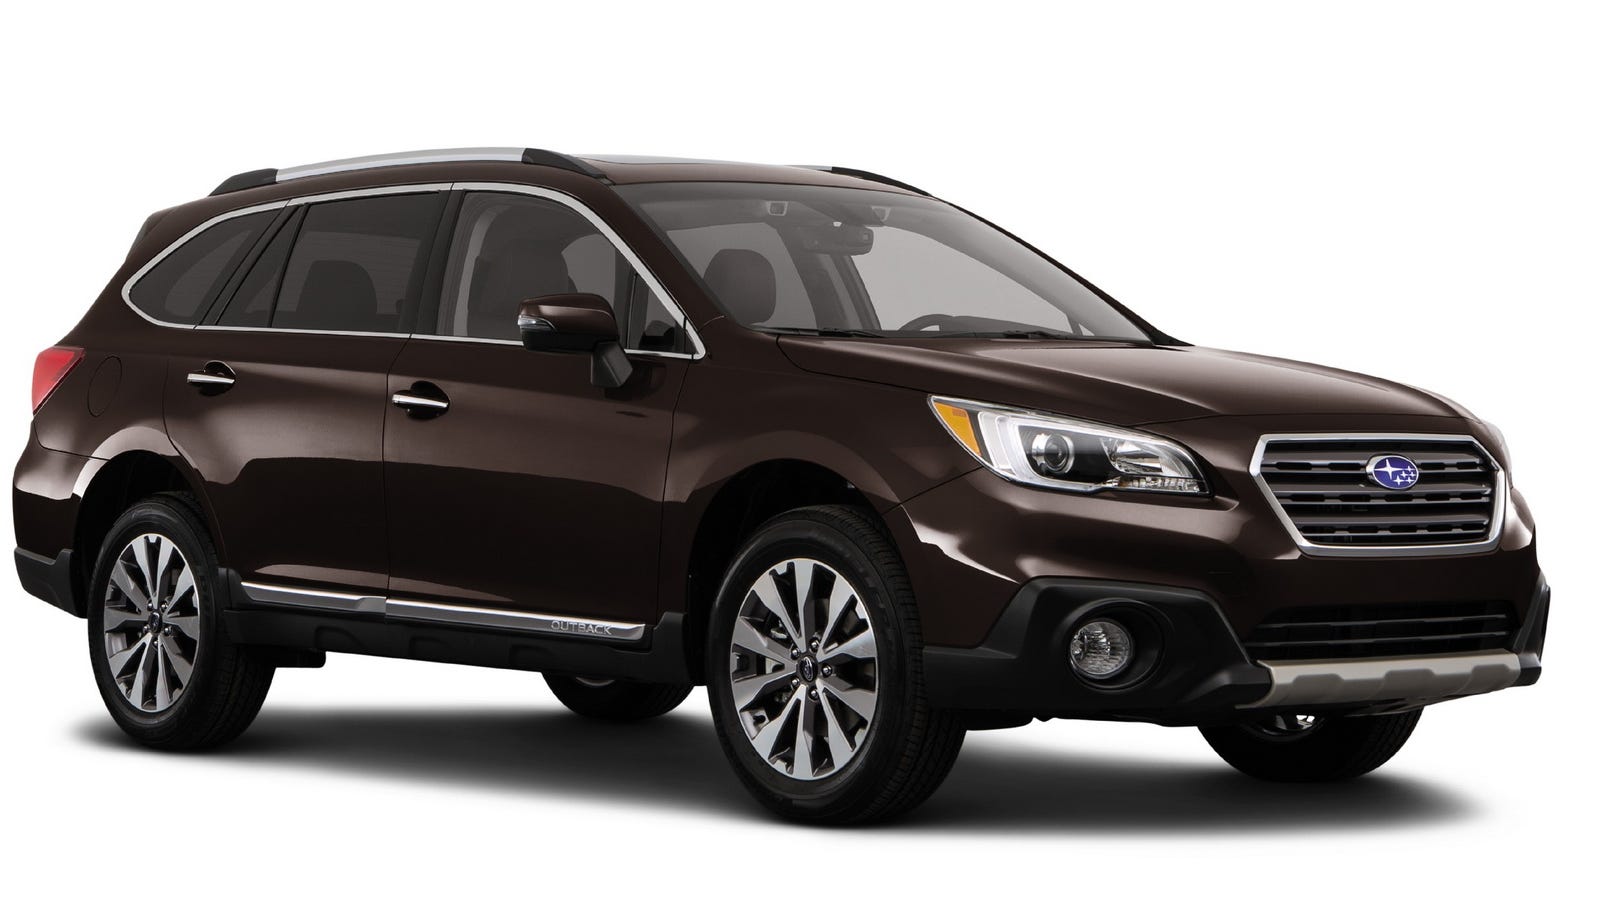 2017 Subaru Outback is the essential crossover